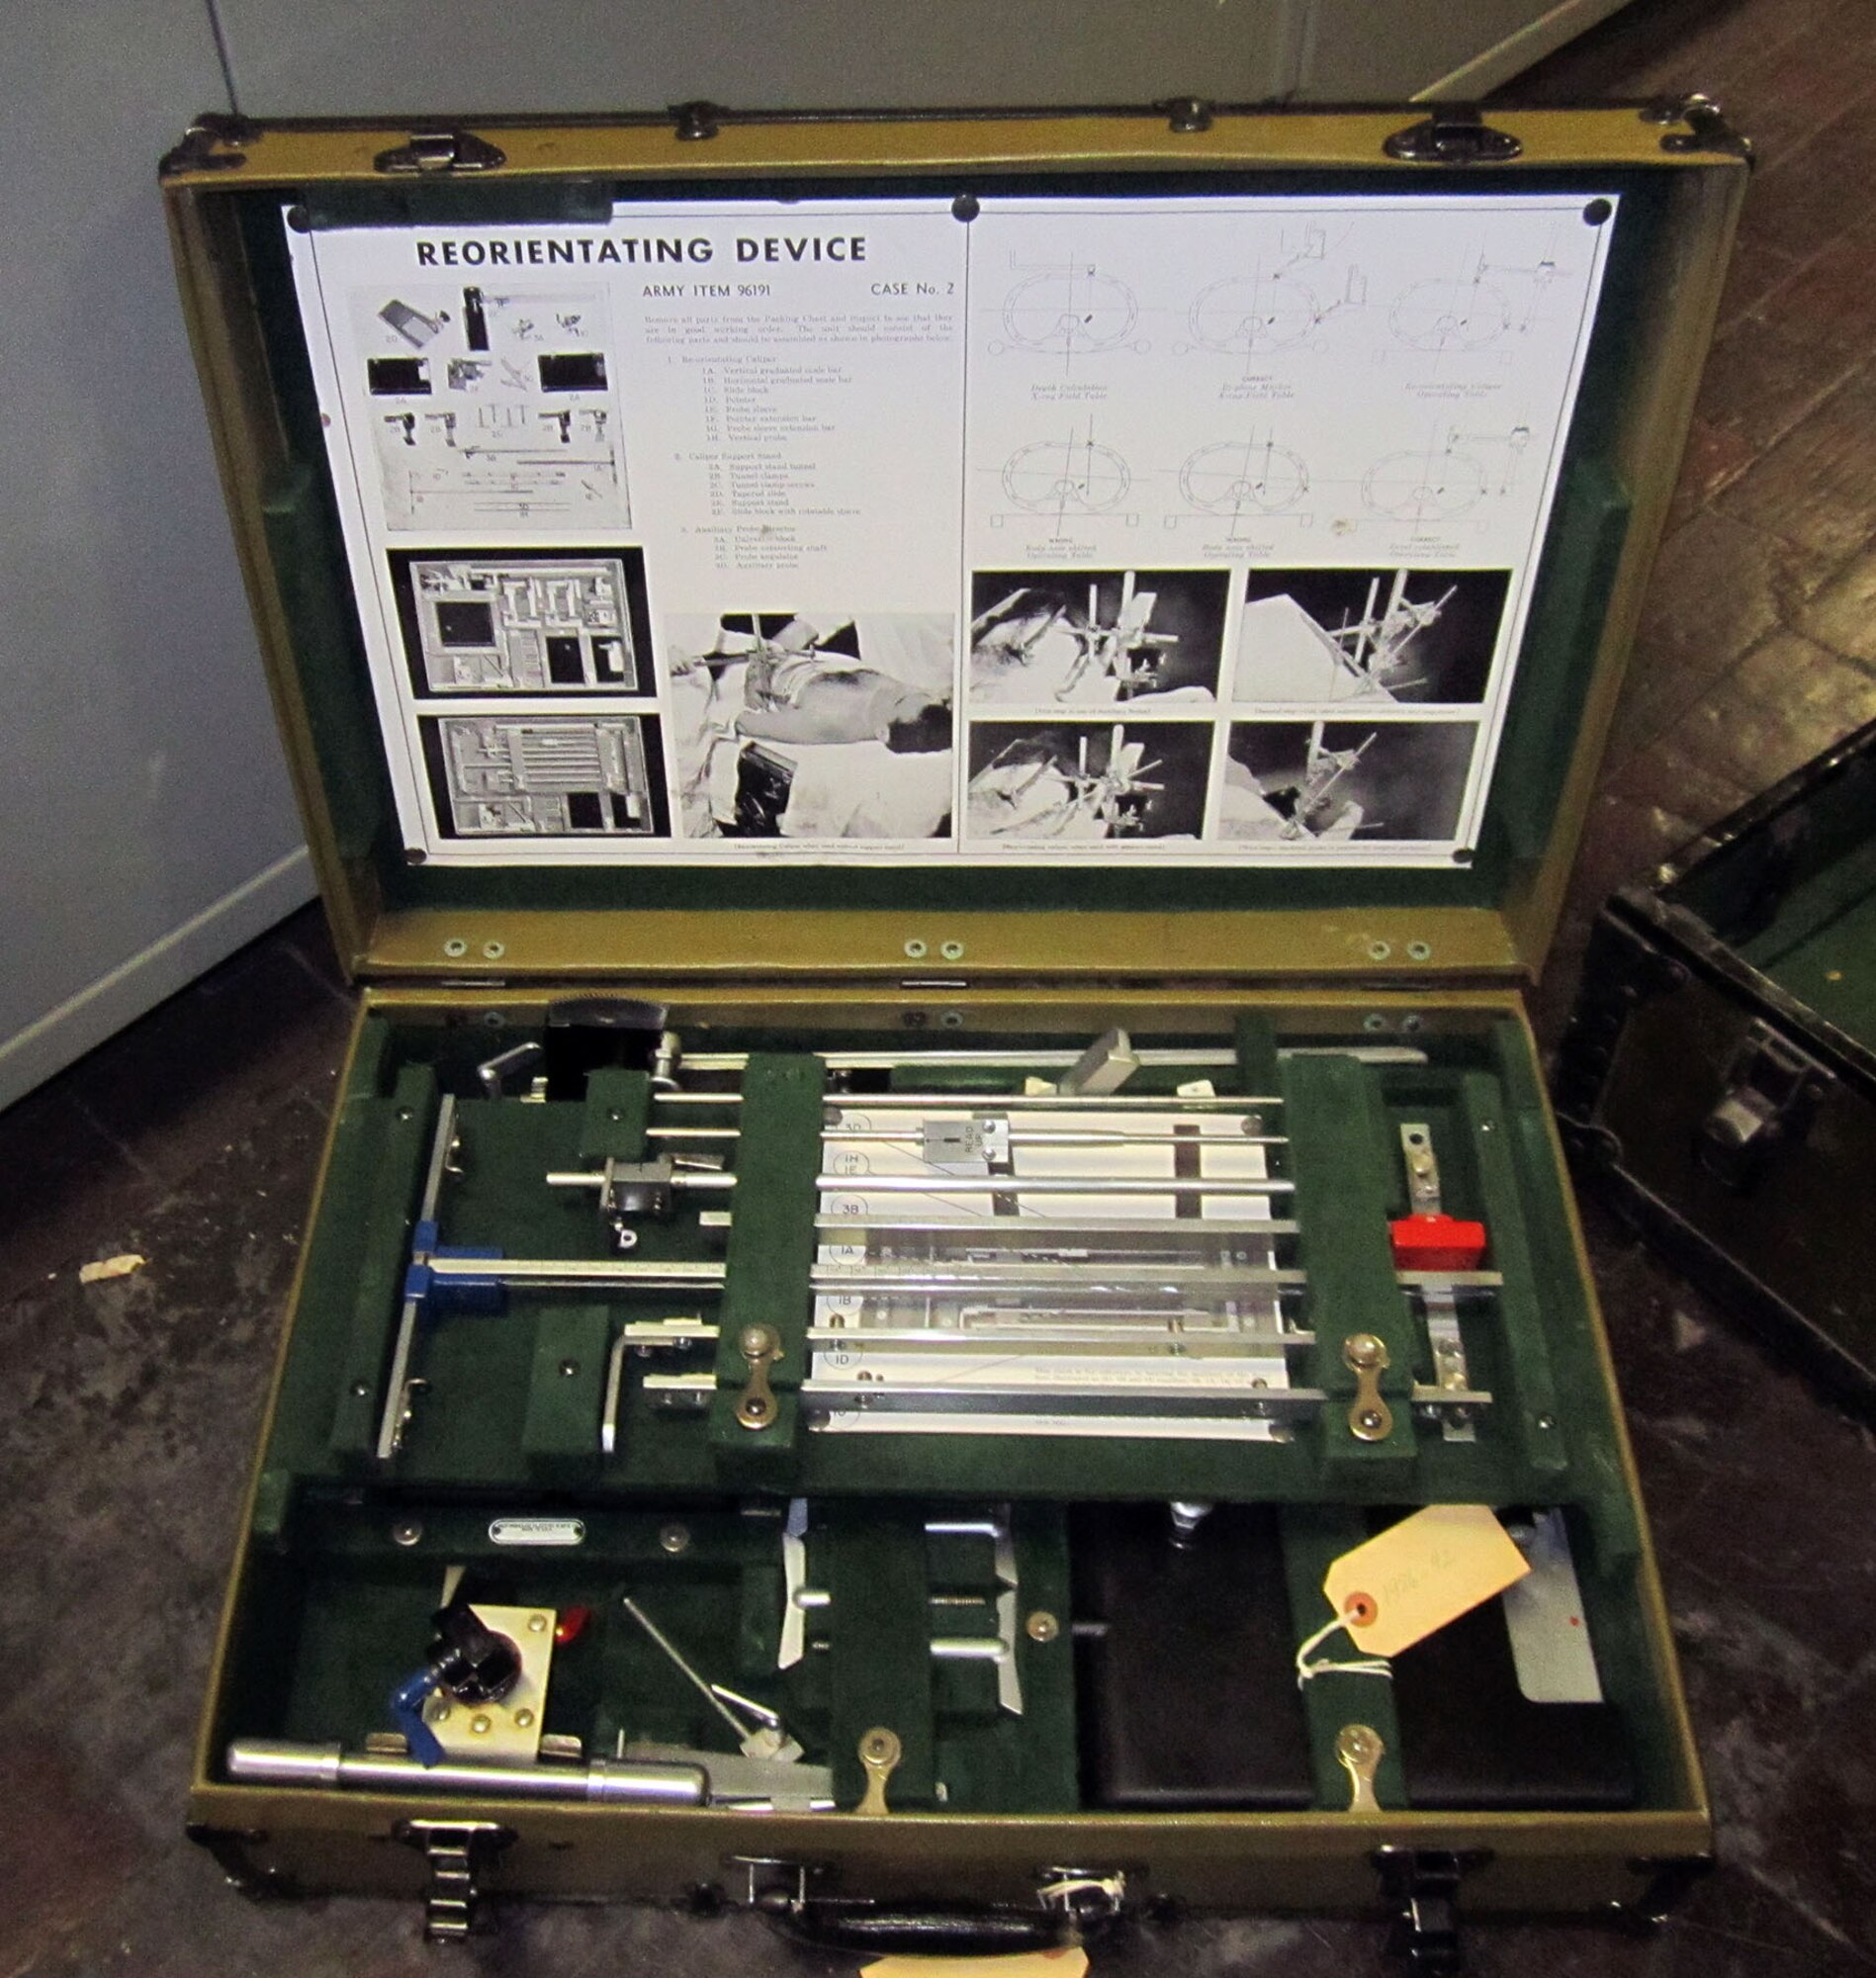 This X-ray unit was manufactured by Westinghouse Electric & Manufacturing Co. and was used to locate foreign objects in human patients. (U.S. Air Force photo)